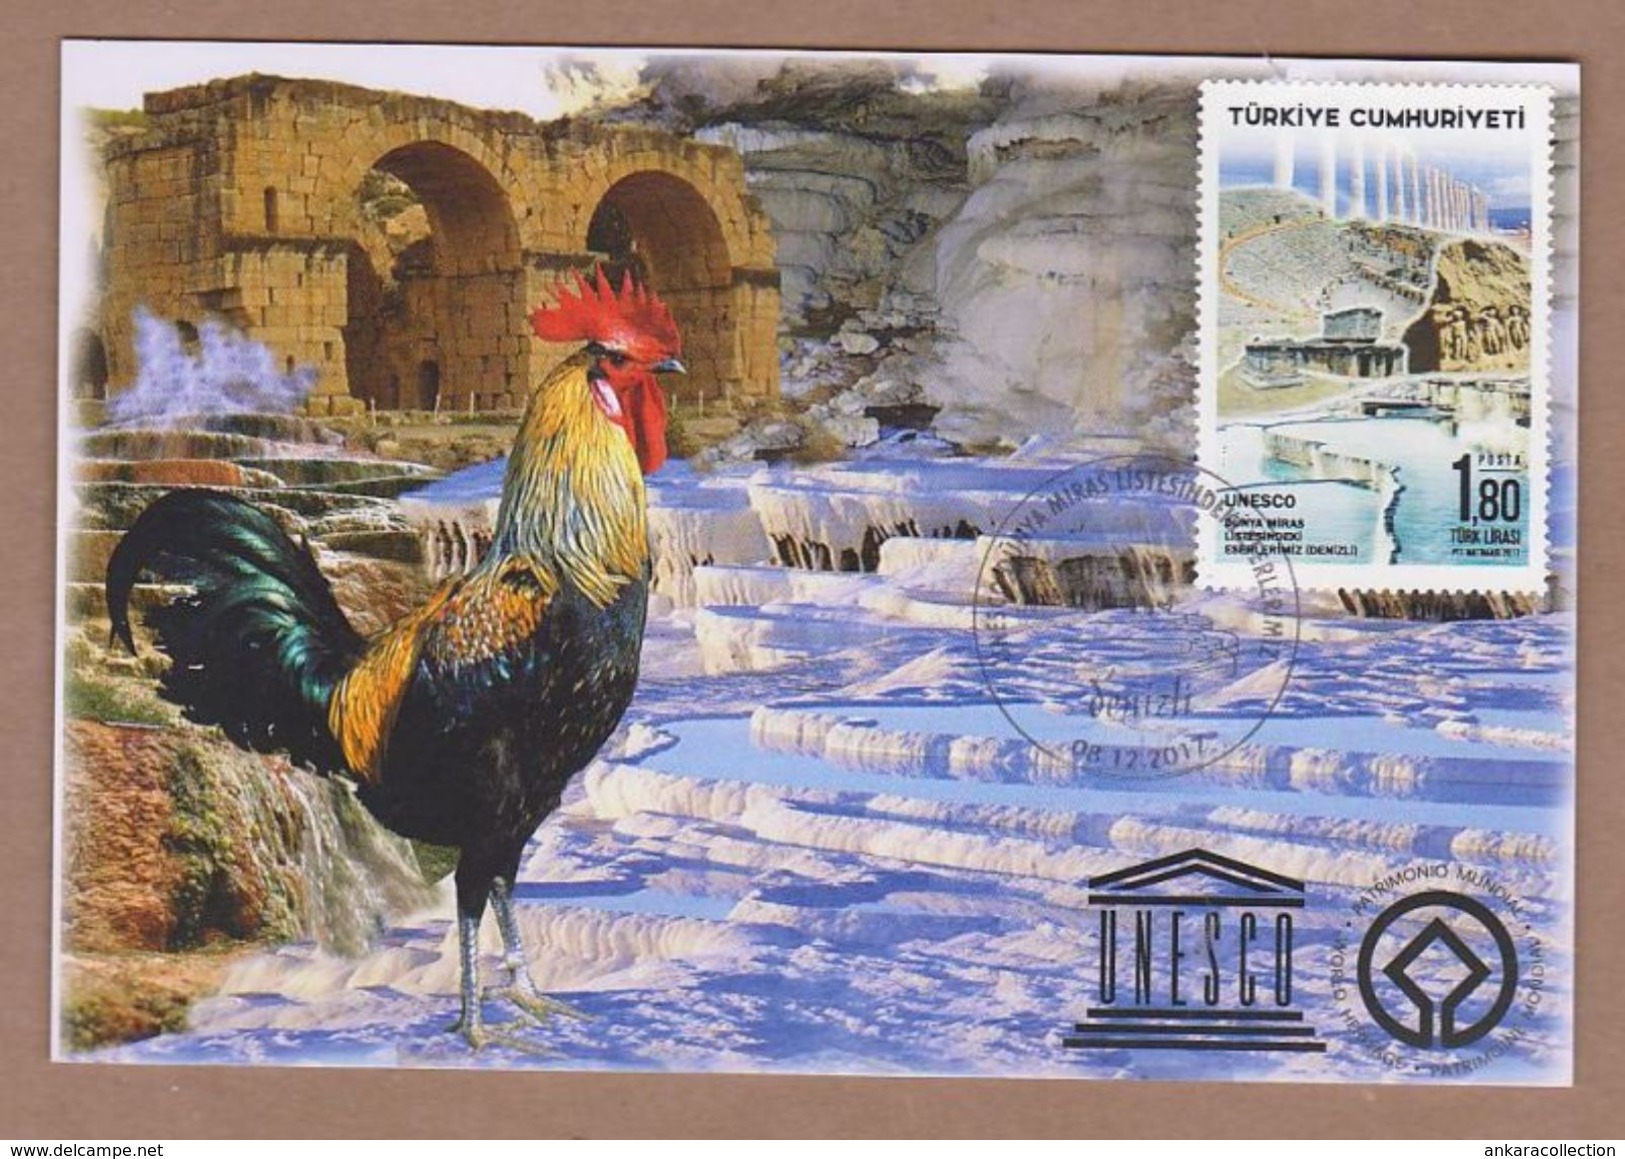 AC - TURKEY POSTAL STATIONARY - OUR SITES IN UNECO'S WORLD HERITAGE LIST 08 DECEMBER 2017 - Postal Stationery